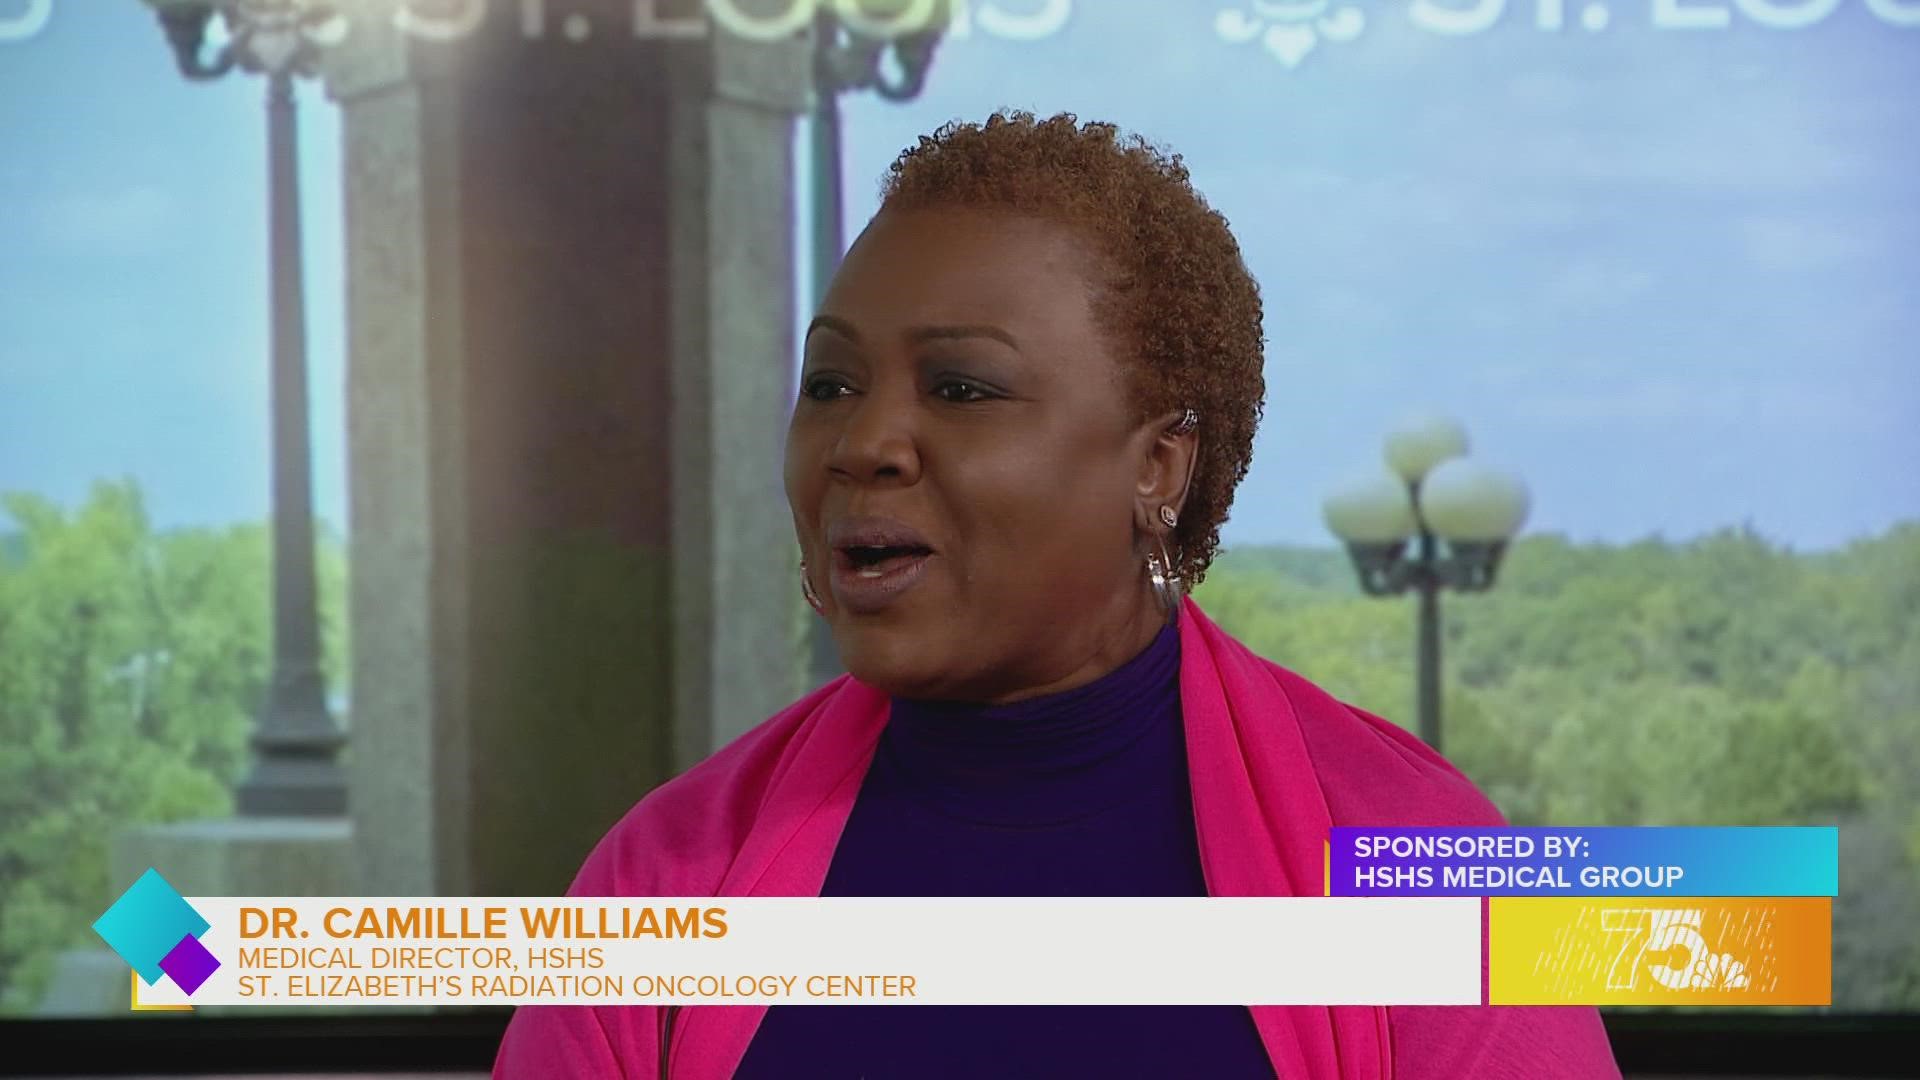 Dr. Camille Williams discusses the importance of understanding the risks for breast cancer, preventative screenings and how breast cancer is treated.